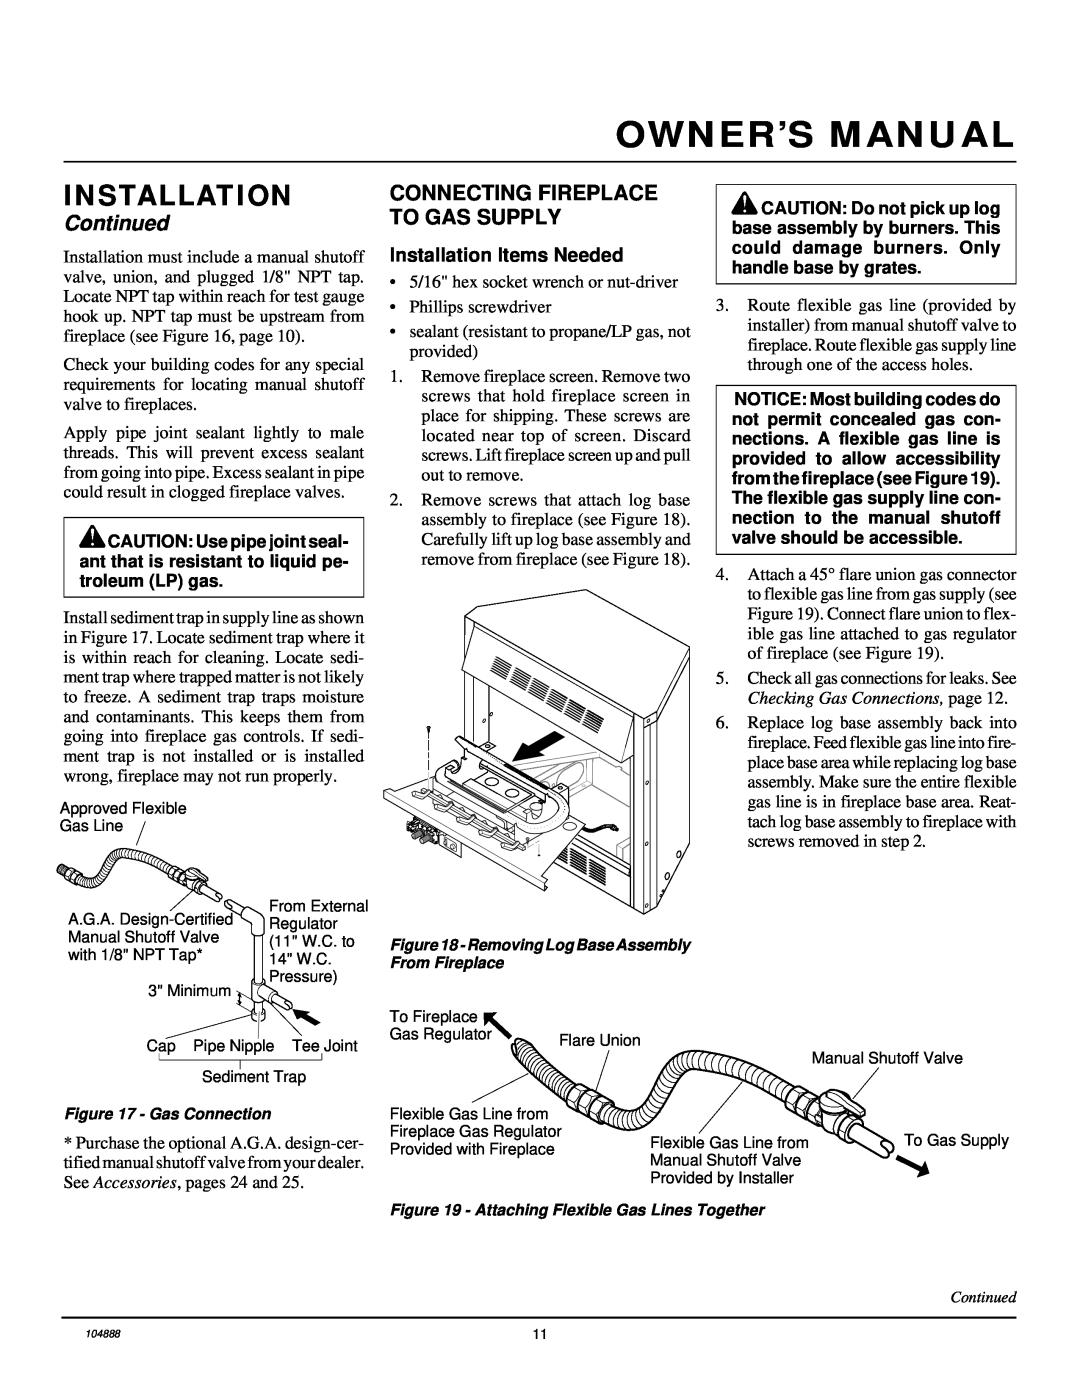 Desa LFP33PR installation manual Connecting Fireplace To Gas Supply, Installation, Continued 